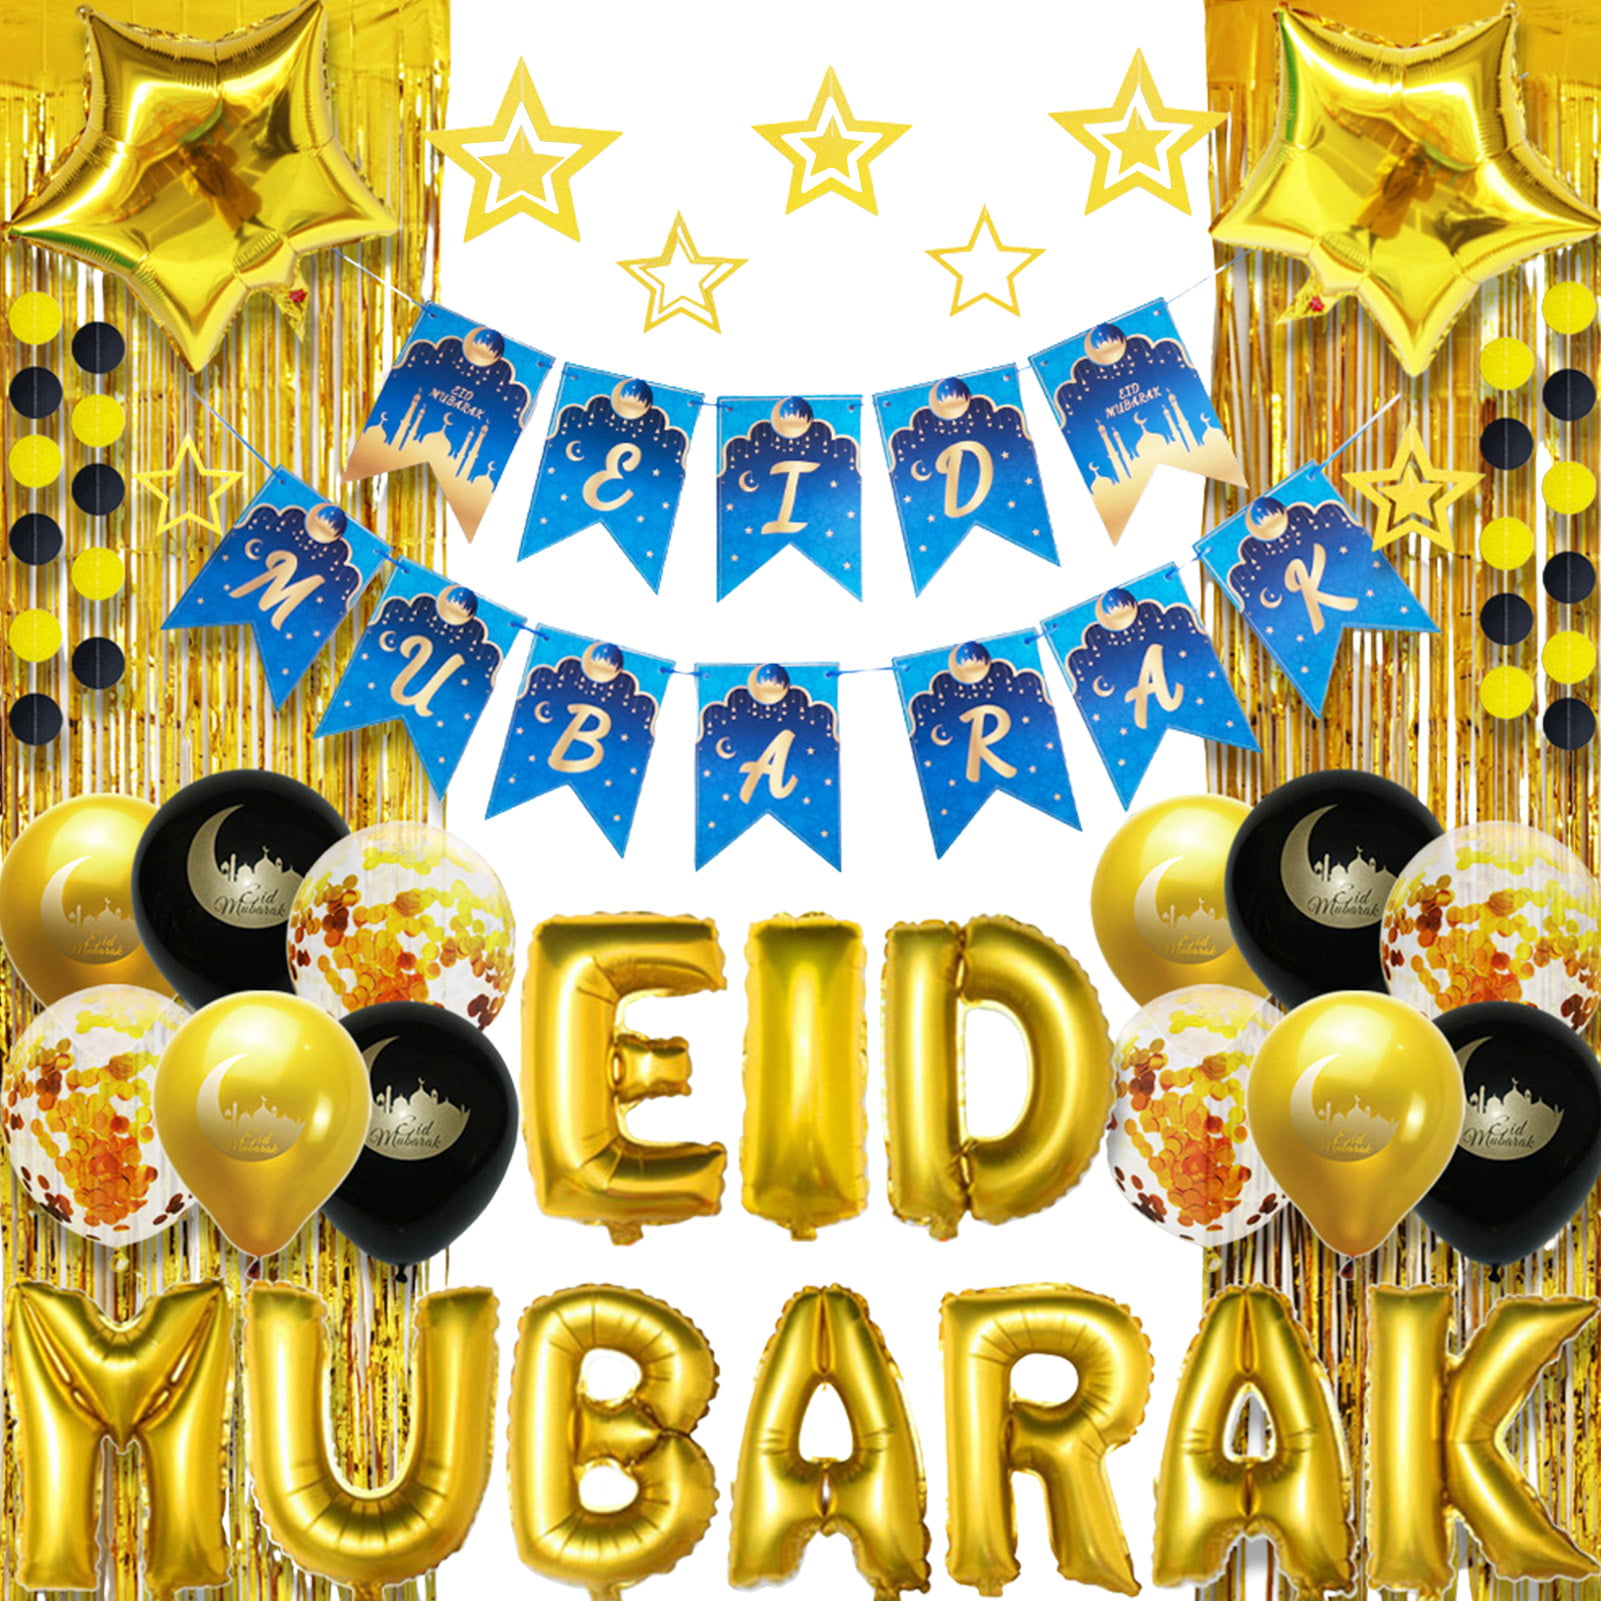 Party-Poter Eid Mubarak Banner Eid Banner with Gitter eid decorations for home Not Need DIY Eid Party Supplies Decorations Eid Celebration Decoration For Eid Mubarak Party 